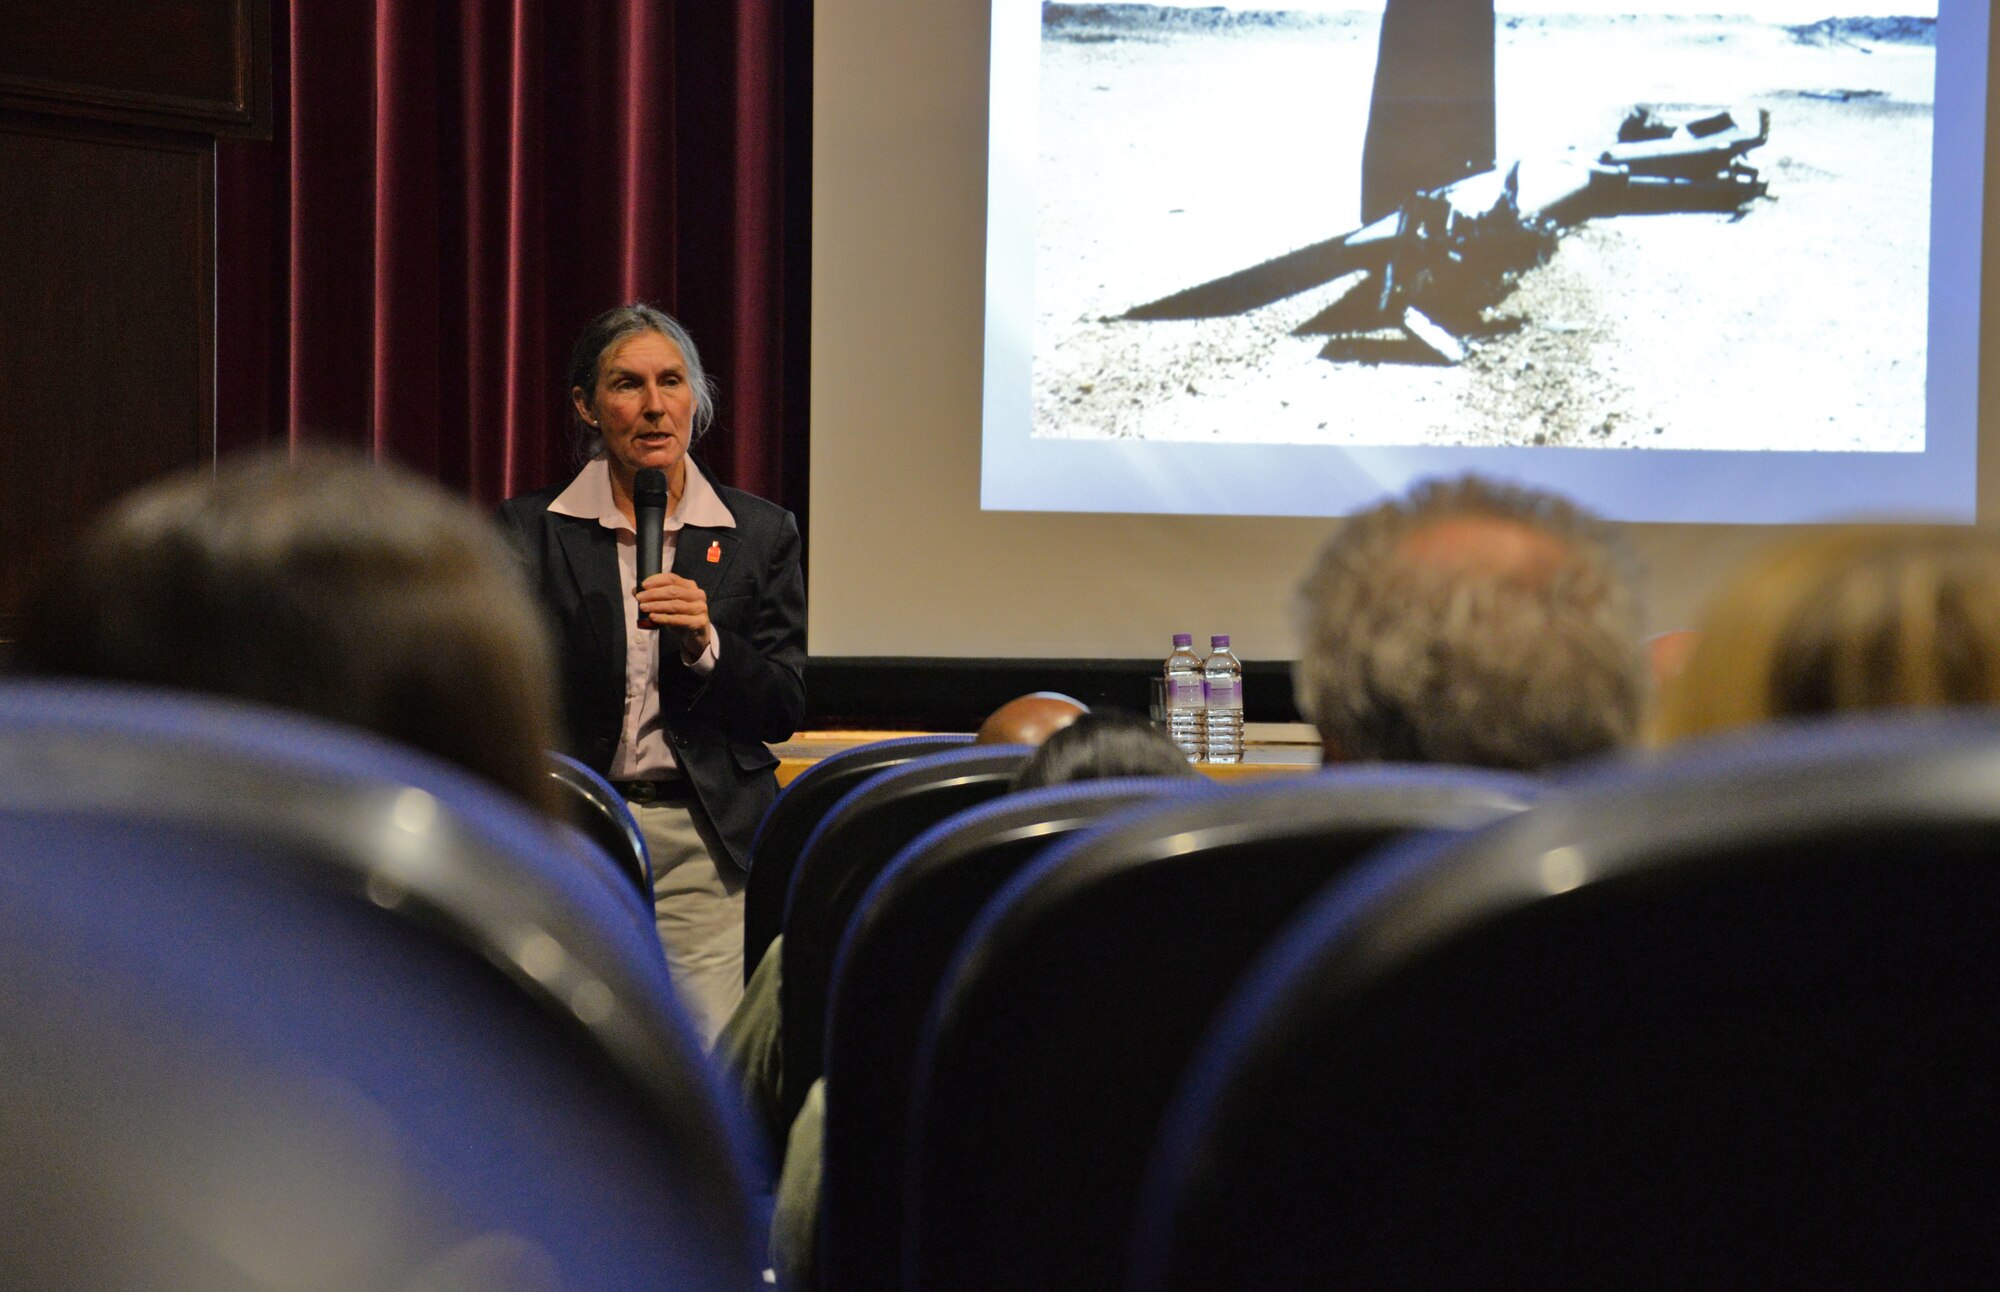 Retired U.S. Army Brig. Gen. Rhonda Cornum shares her personal story with Team Mildenhall members about her story of being captured during the Persian Gulf War, Mar. 2, 2017, at the base theater on RAF Mildenhall, England. Cornum spoke about injuries she sustained from a helicopter crash during the war and about her subsequent capture by Iraqi soldiers who held her as a prisoner of war. She described how her resiliency and positive thoughts got her through the ordeal when she returned home. (U.S. Air Force photo by Senior Airman Christine Halan) 